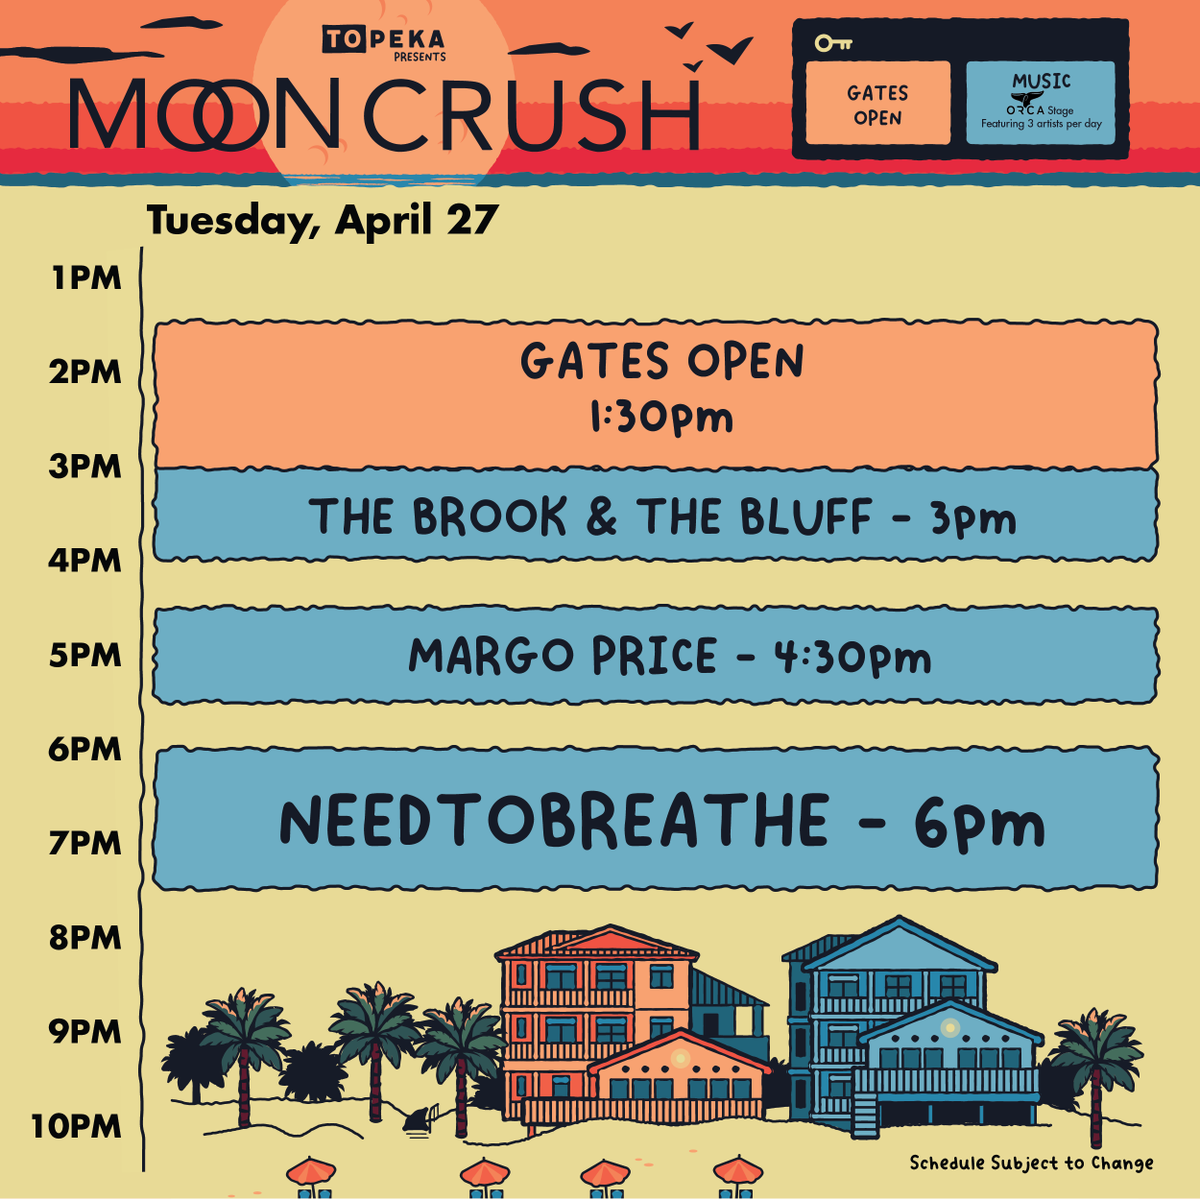 UPDATE: Due to a positive Covid test, Shovels & Rope are unable to perform at Moon Crush as originally scheduled. However, we are pleased to announce that @brookandbluff will take the Orca Stage at 3pm tomorrow!